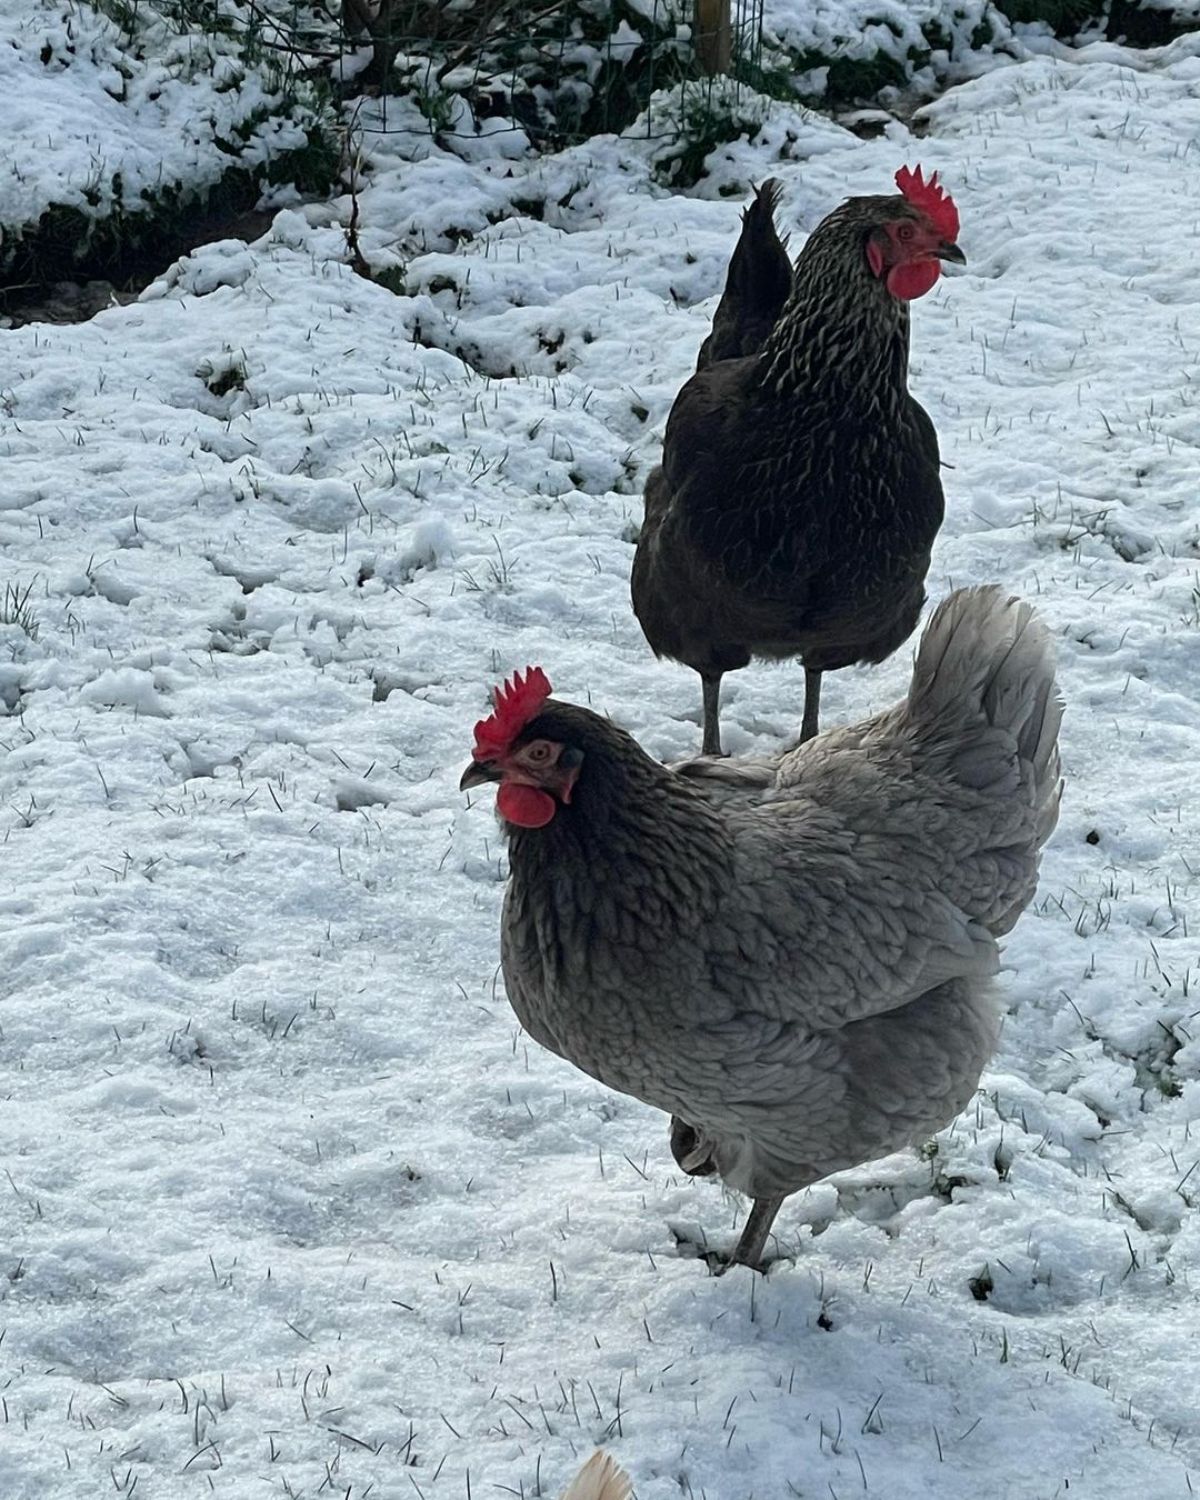 Two Daisy Belle hens wandering in a snowy background.